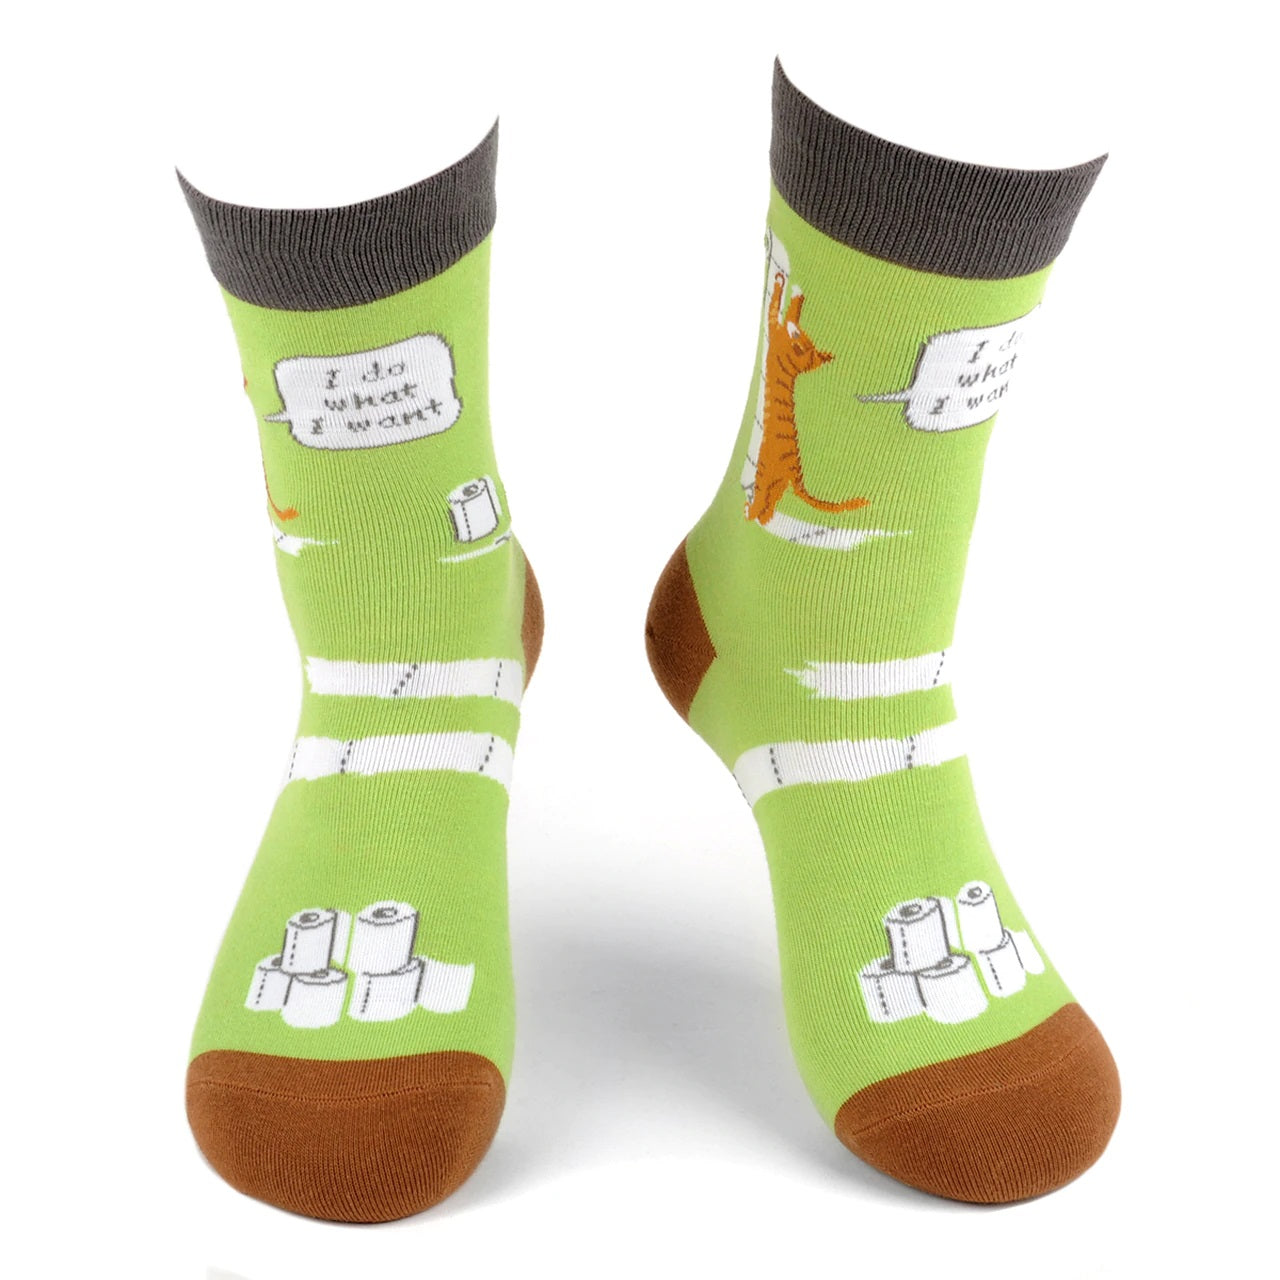 MashasCorner.com   Covid-19 -Toilet Paper- Ultra Premium Novelty Socks  Material: 68% cotton, 29% polyester, 3% spandex Sizes: available in S/M and L/XL S/M: men shoe size: 4.5-7.5, ladies shoe size: 5.5-9.5 L/XL: men shoe size: 8-12, ladies shoe size: 10-10.5 Unisex style